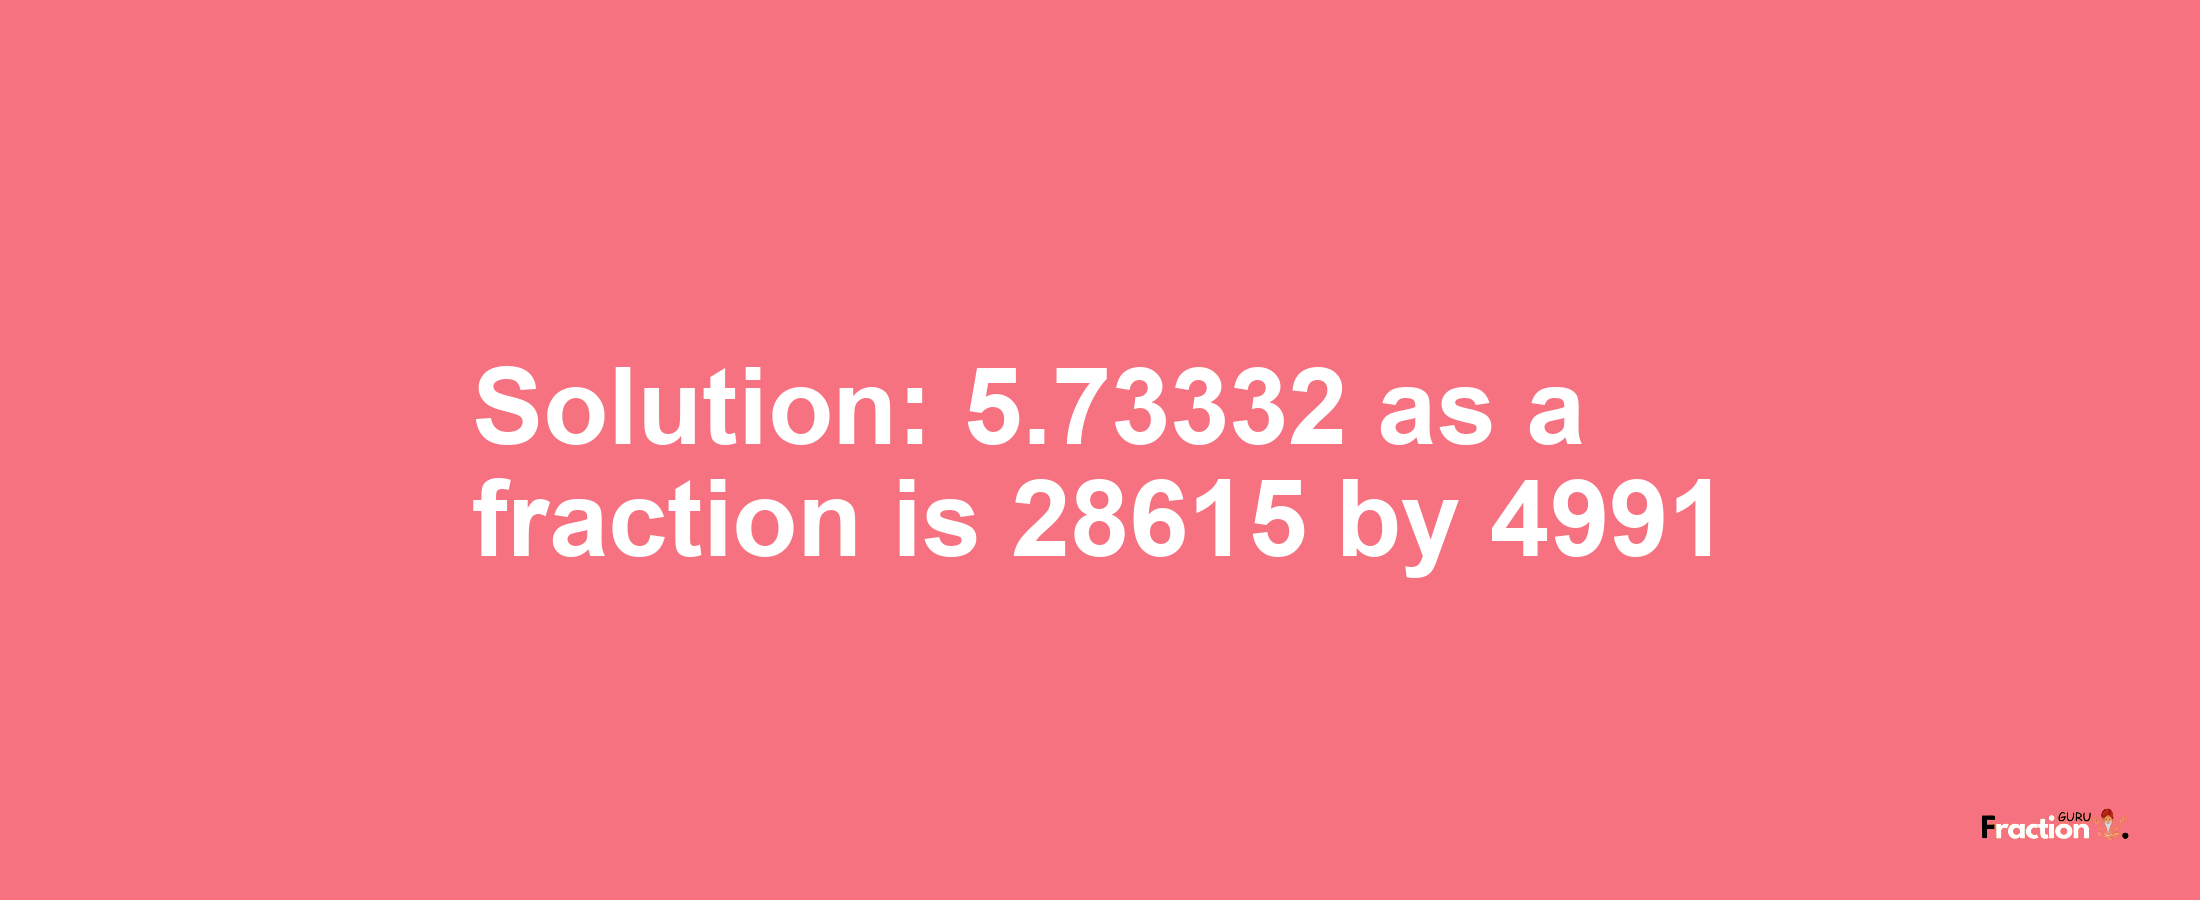 Solution:5.73332 as a fraction is 28615/4991